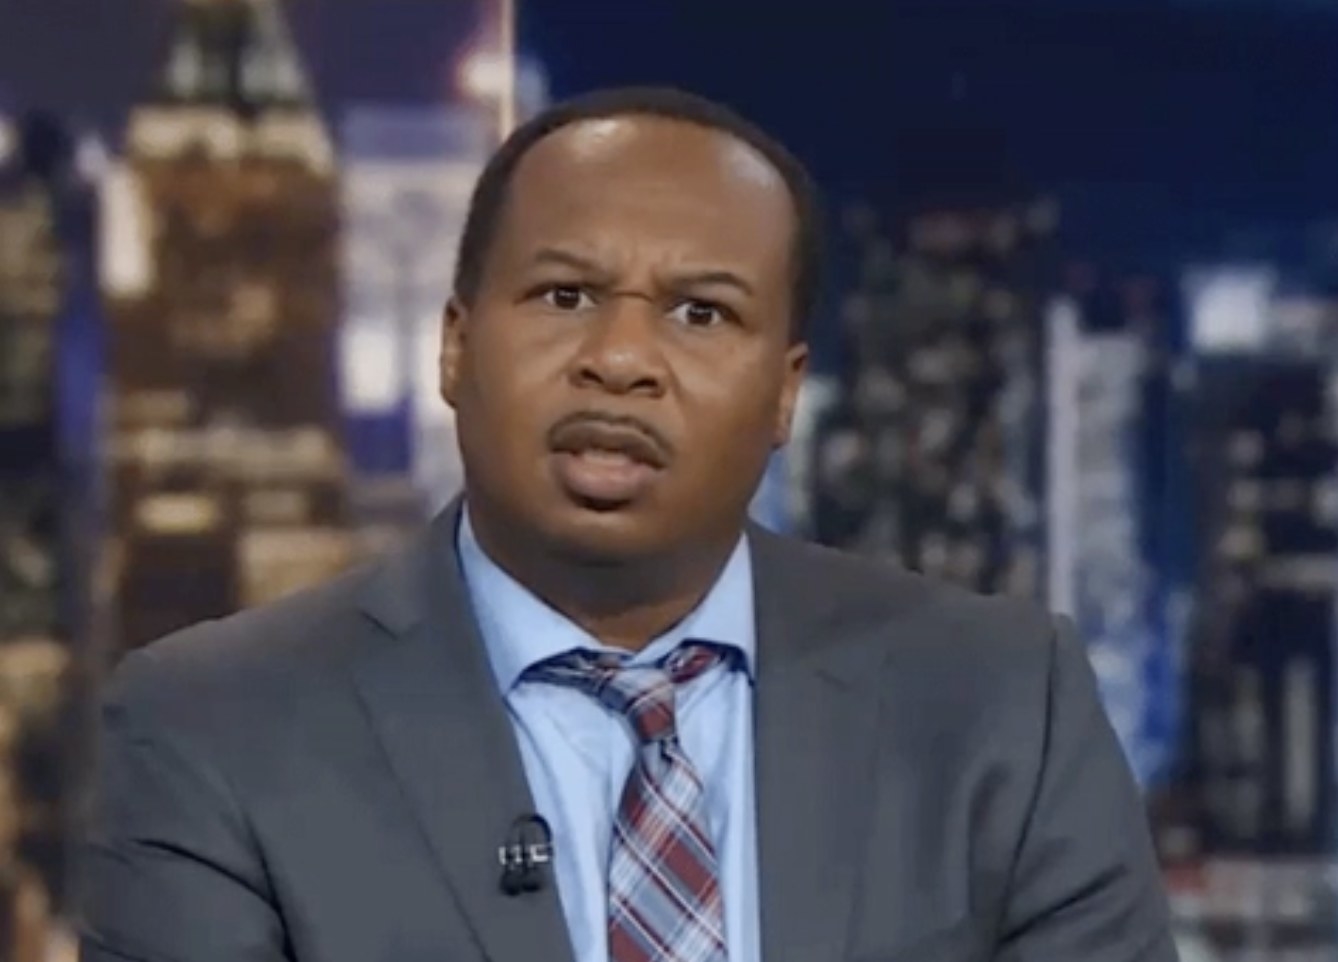 Roy Wood Jr. looks disgusted and concerned